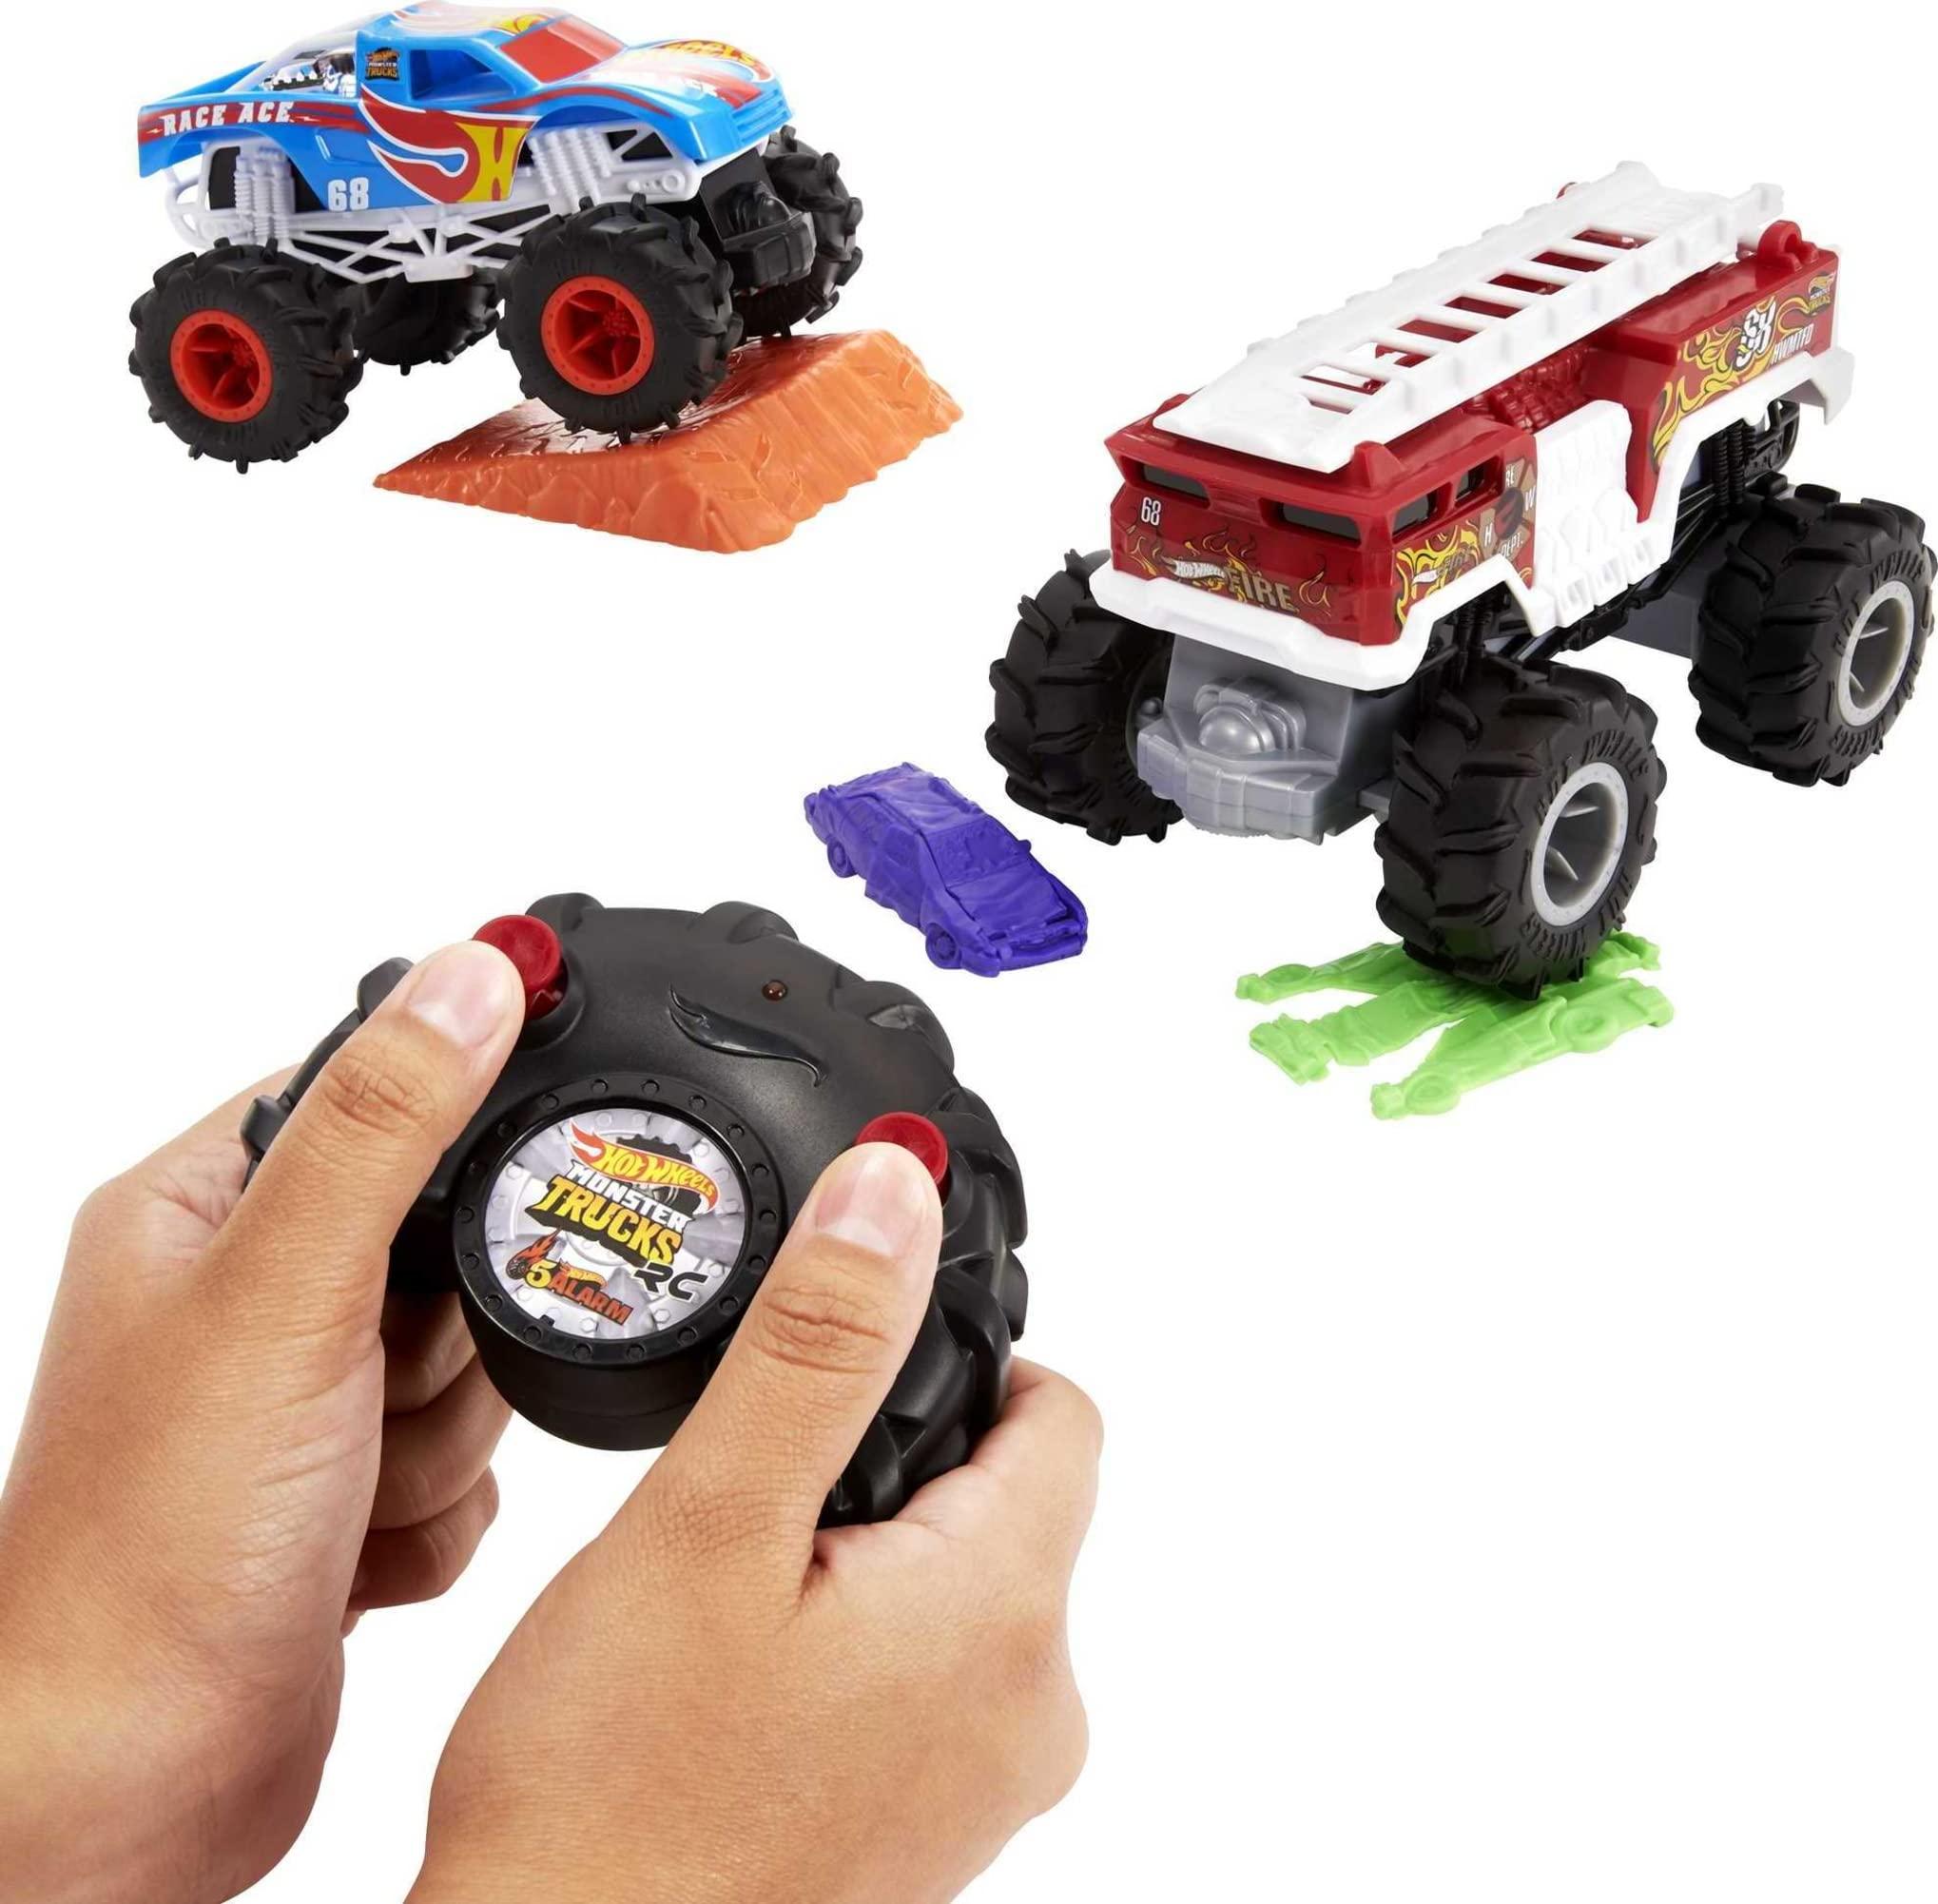 Remote Control Hot Wheels Monster Truck:  Vehicle Characteristics